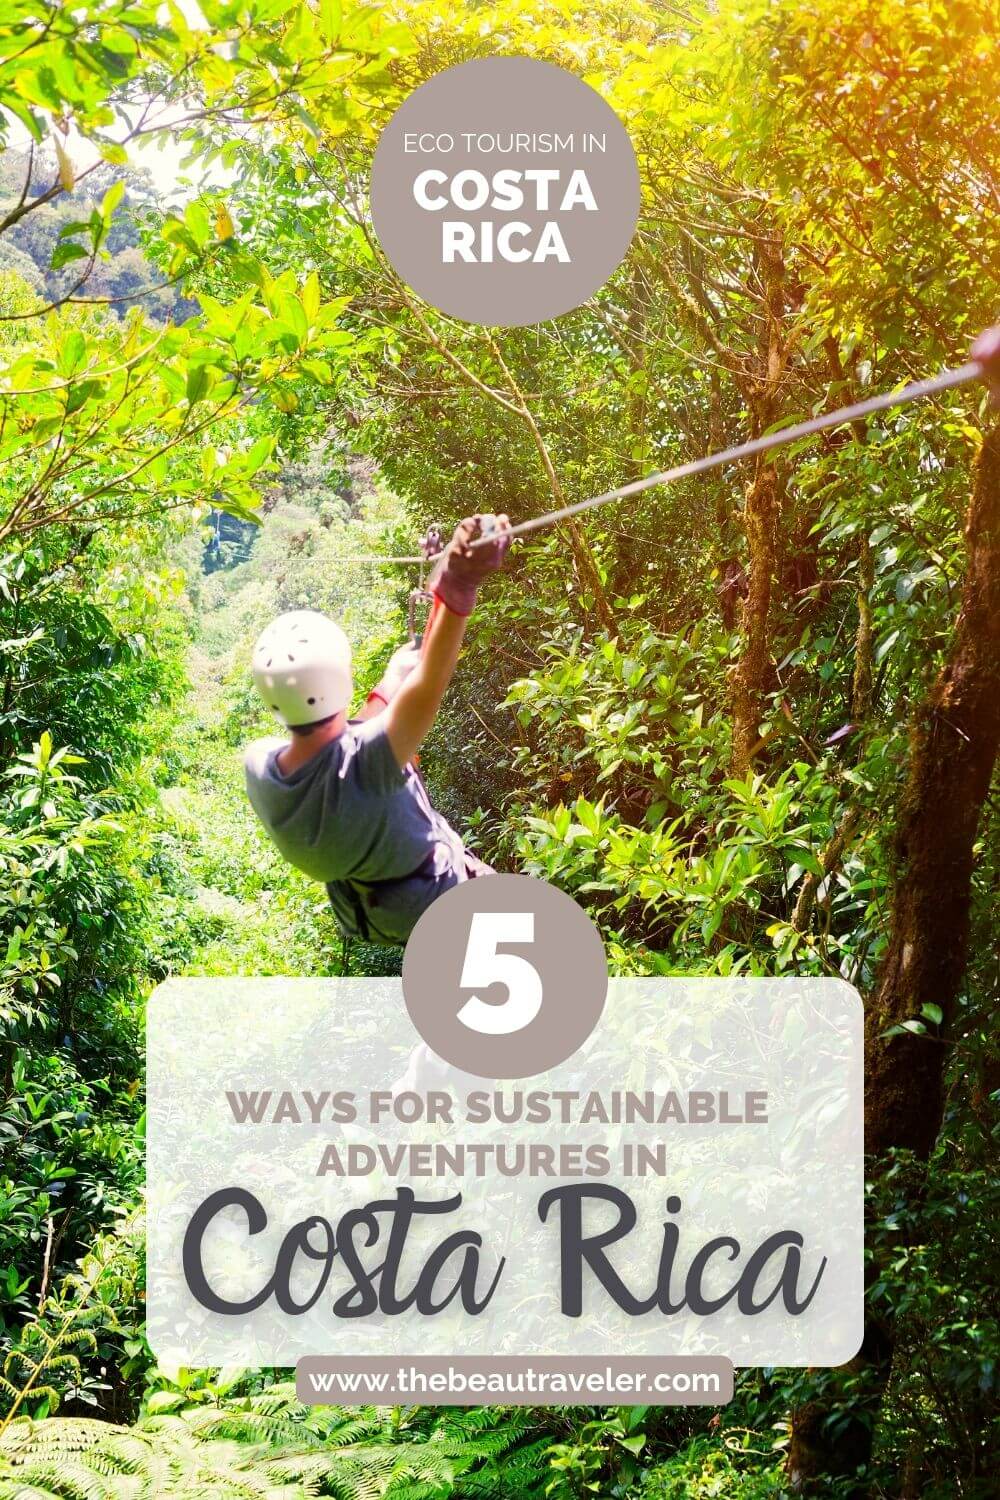 Eco-Tourism in Costa Rica: Sustainable Adventures in the Heart of the Tropics - The BeauTraveler